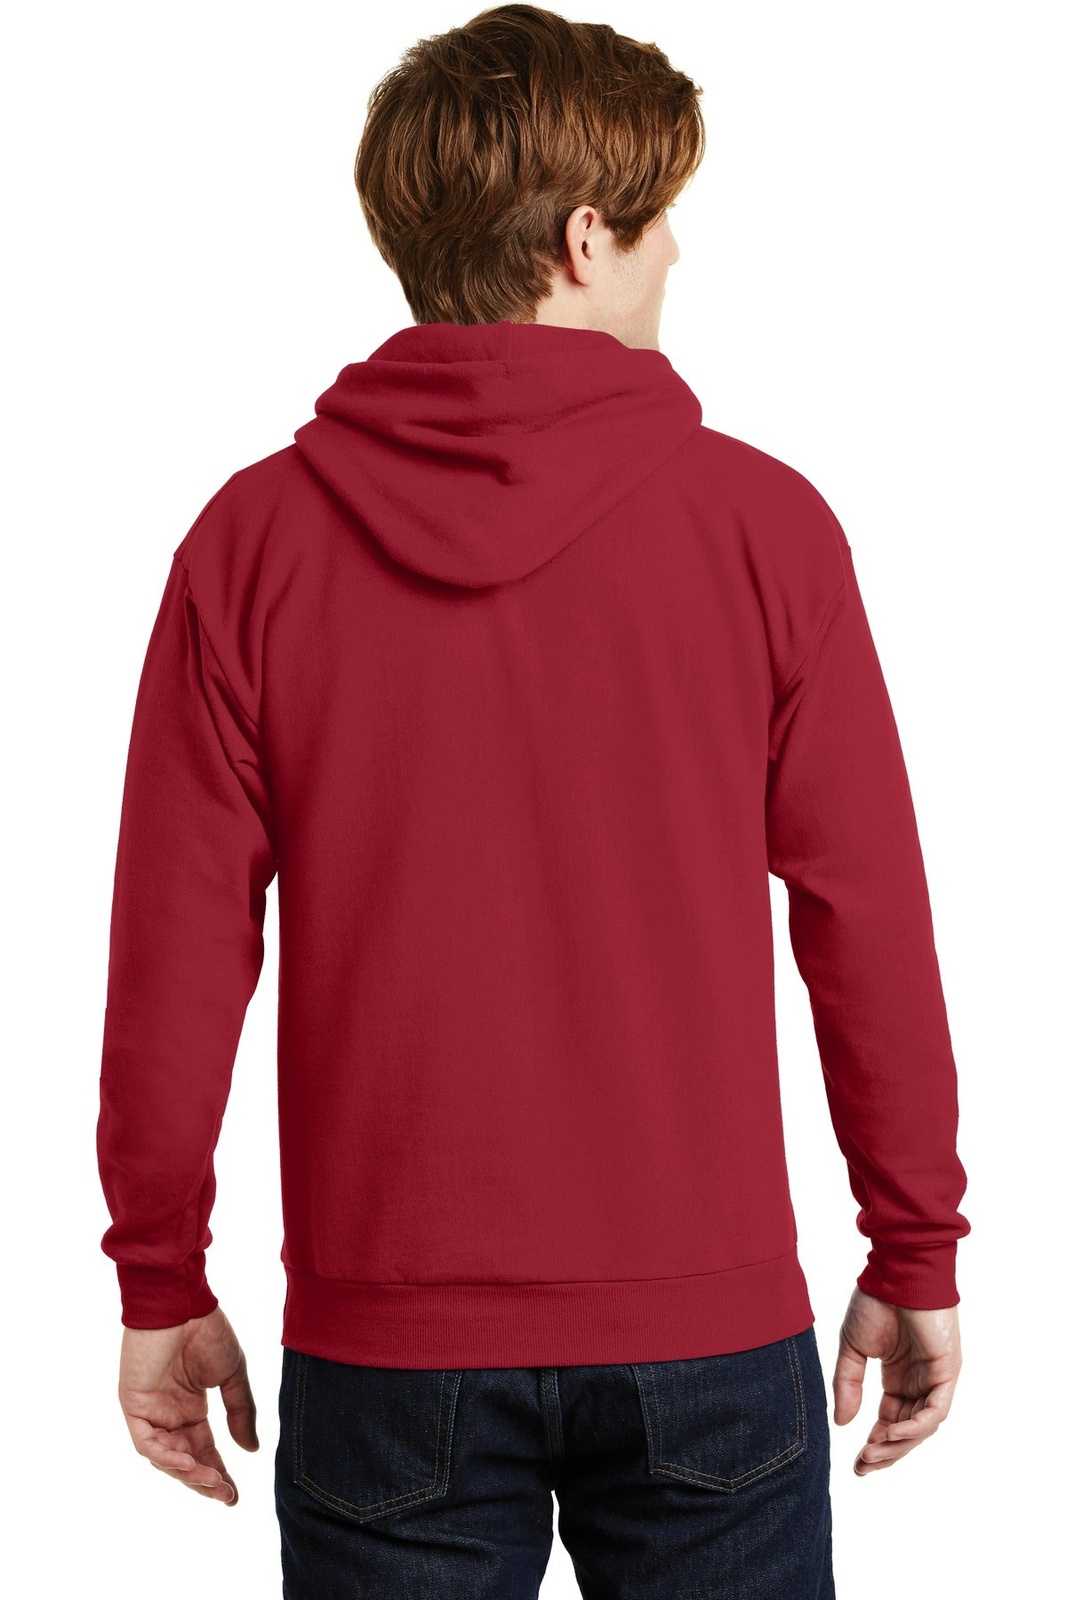 Hanes P170 Ecosmart Pullover Hooded Sweatshirt - Deep Red - HIT a Double